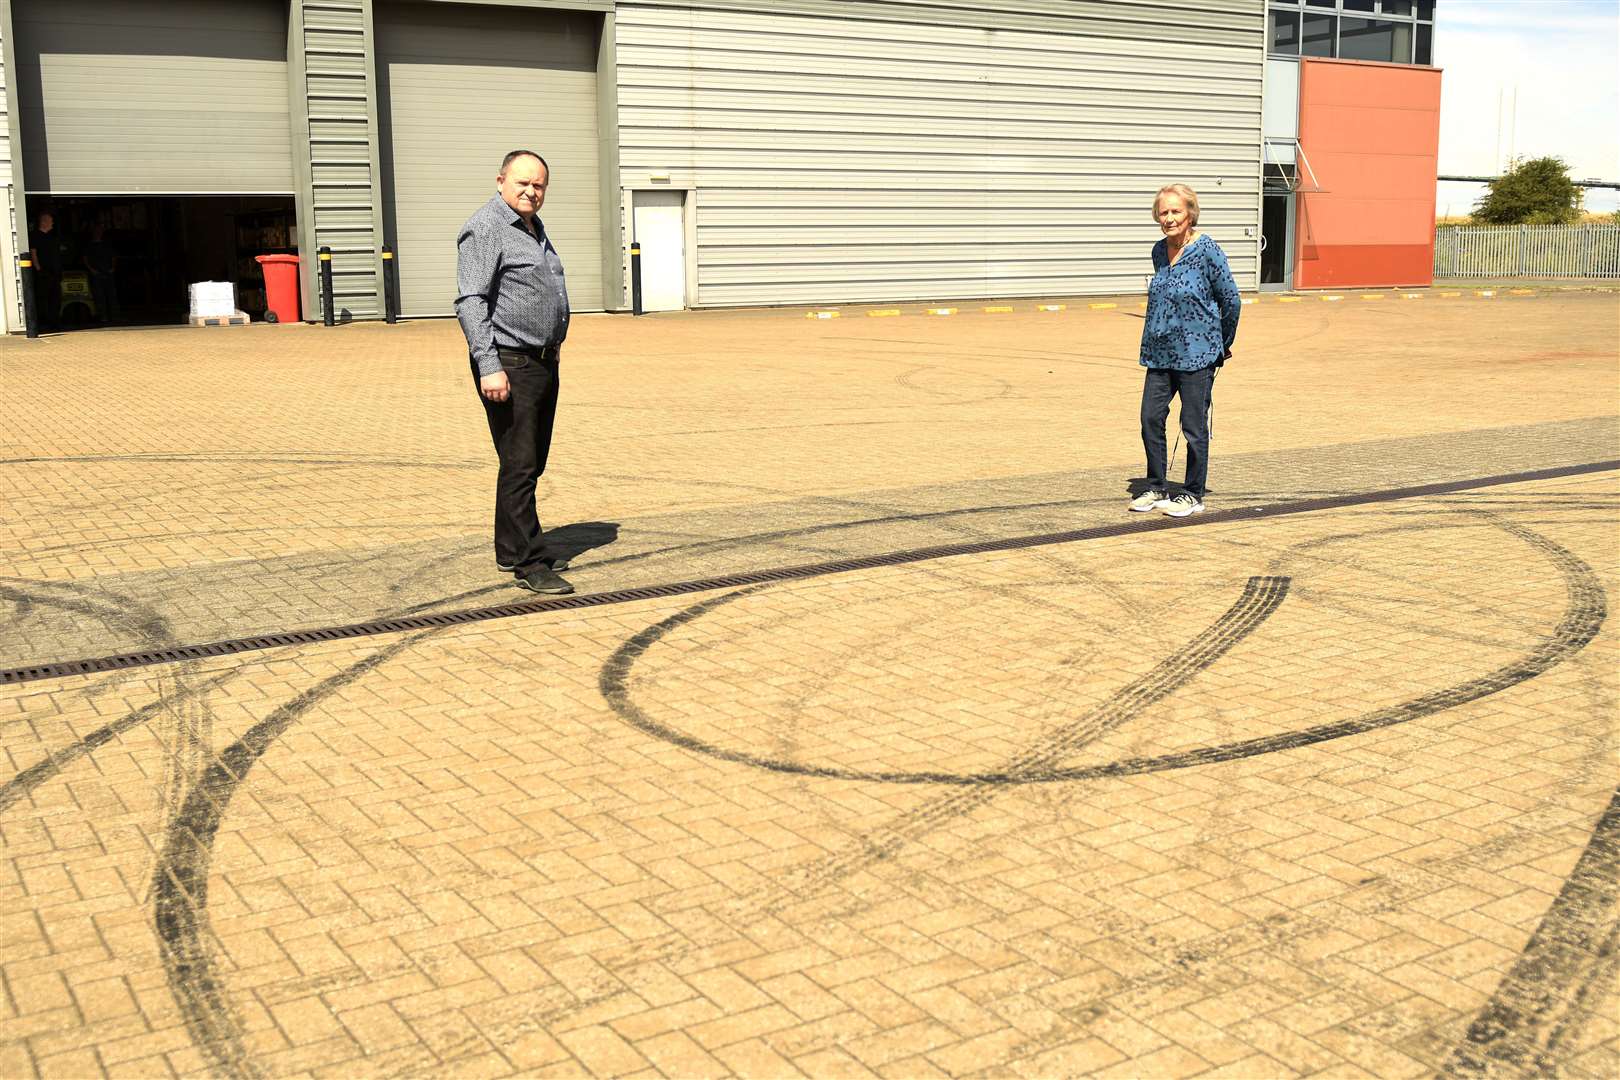 Councillors Peter Harman and Lesley Hawes continue to campaign for more action after "boy racers" targeted the Screwfix site in Crossways Boulevard. Picture: Barry Goodwin.